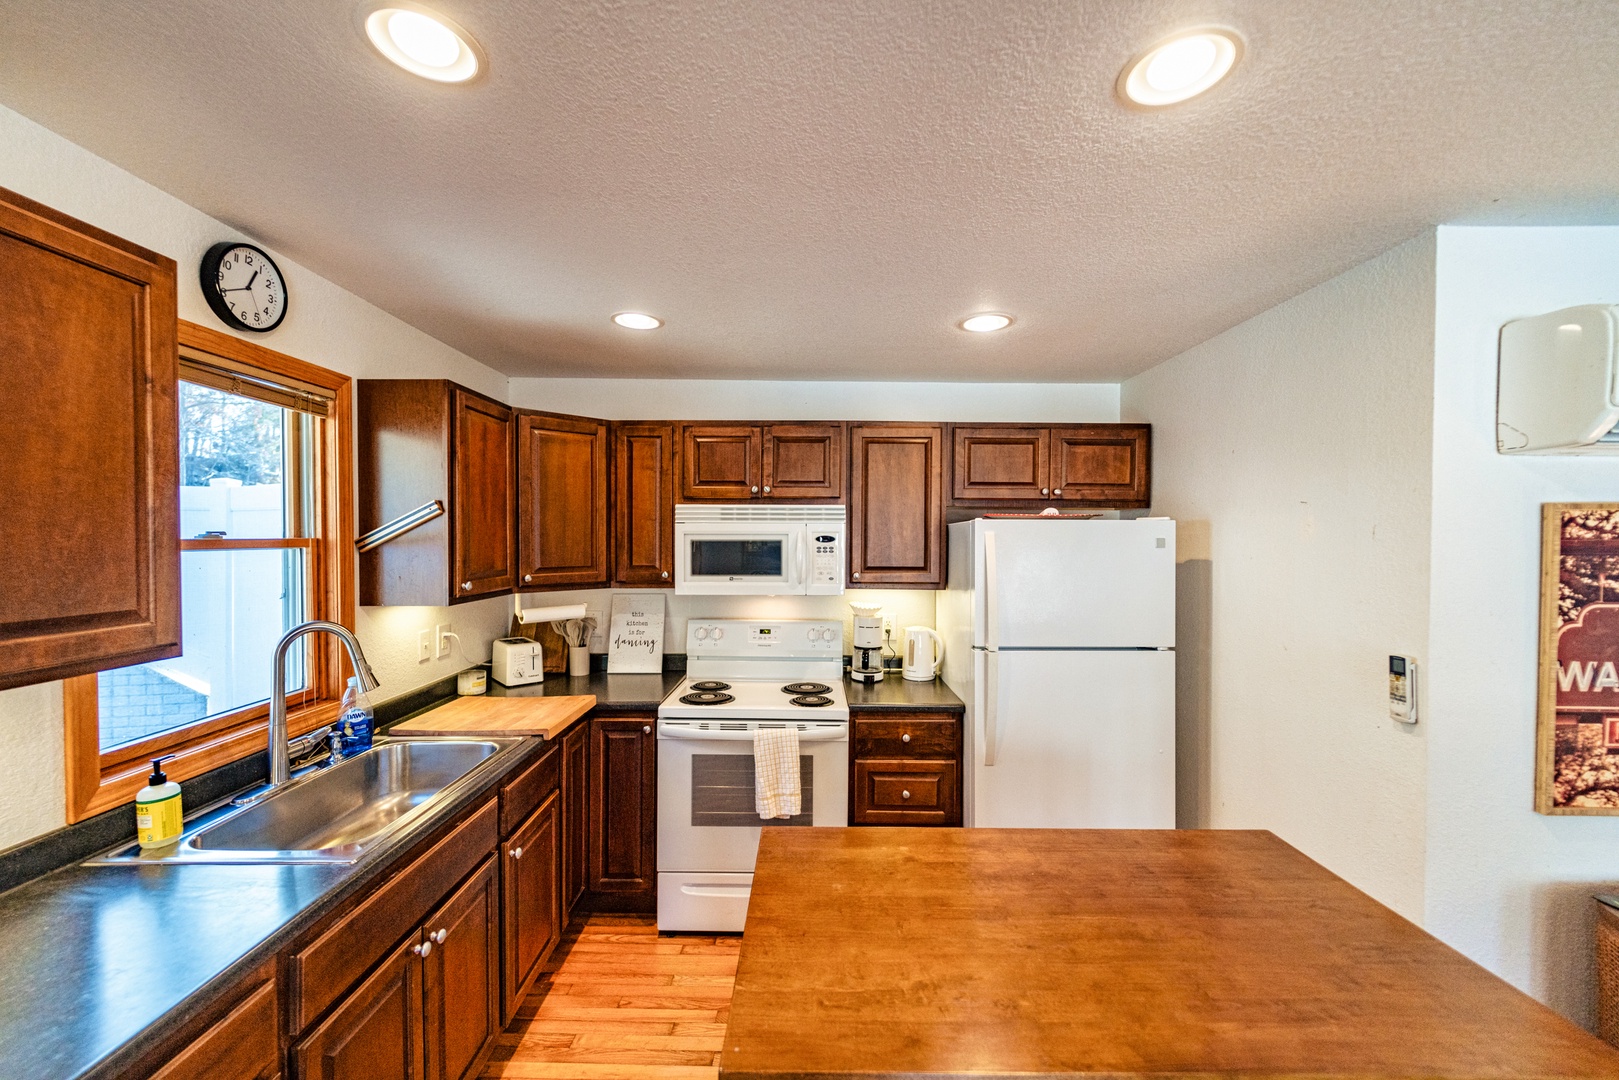 The cozy, open kitchen offers ample space & all the comforts of home